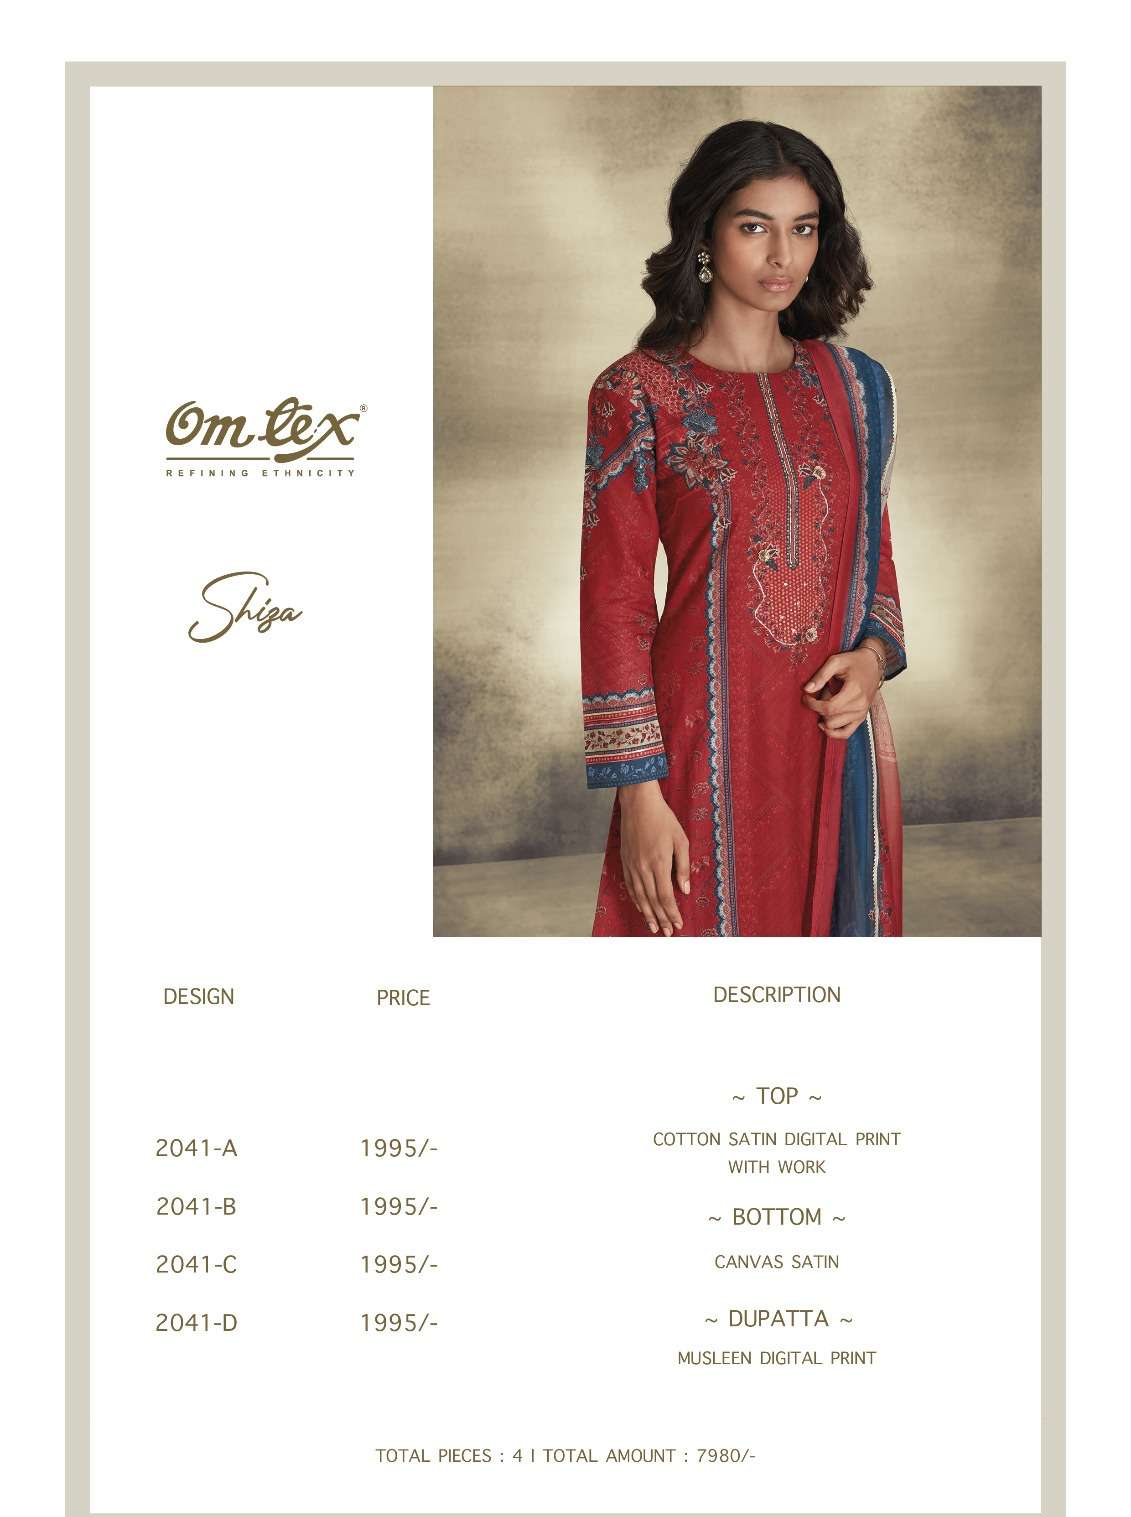 omtex shiza cotton satin digital printed unstich dress material collection surat